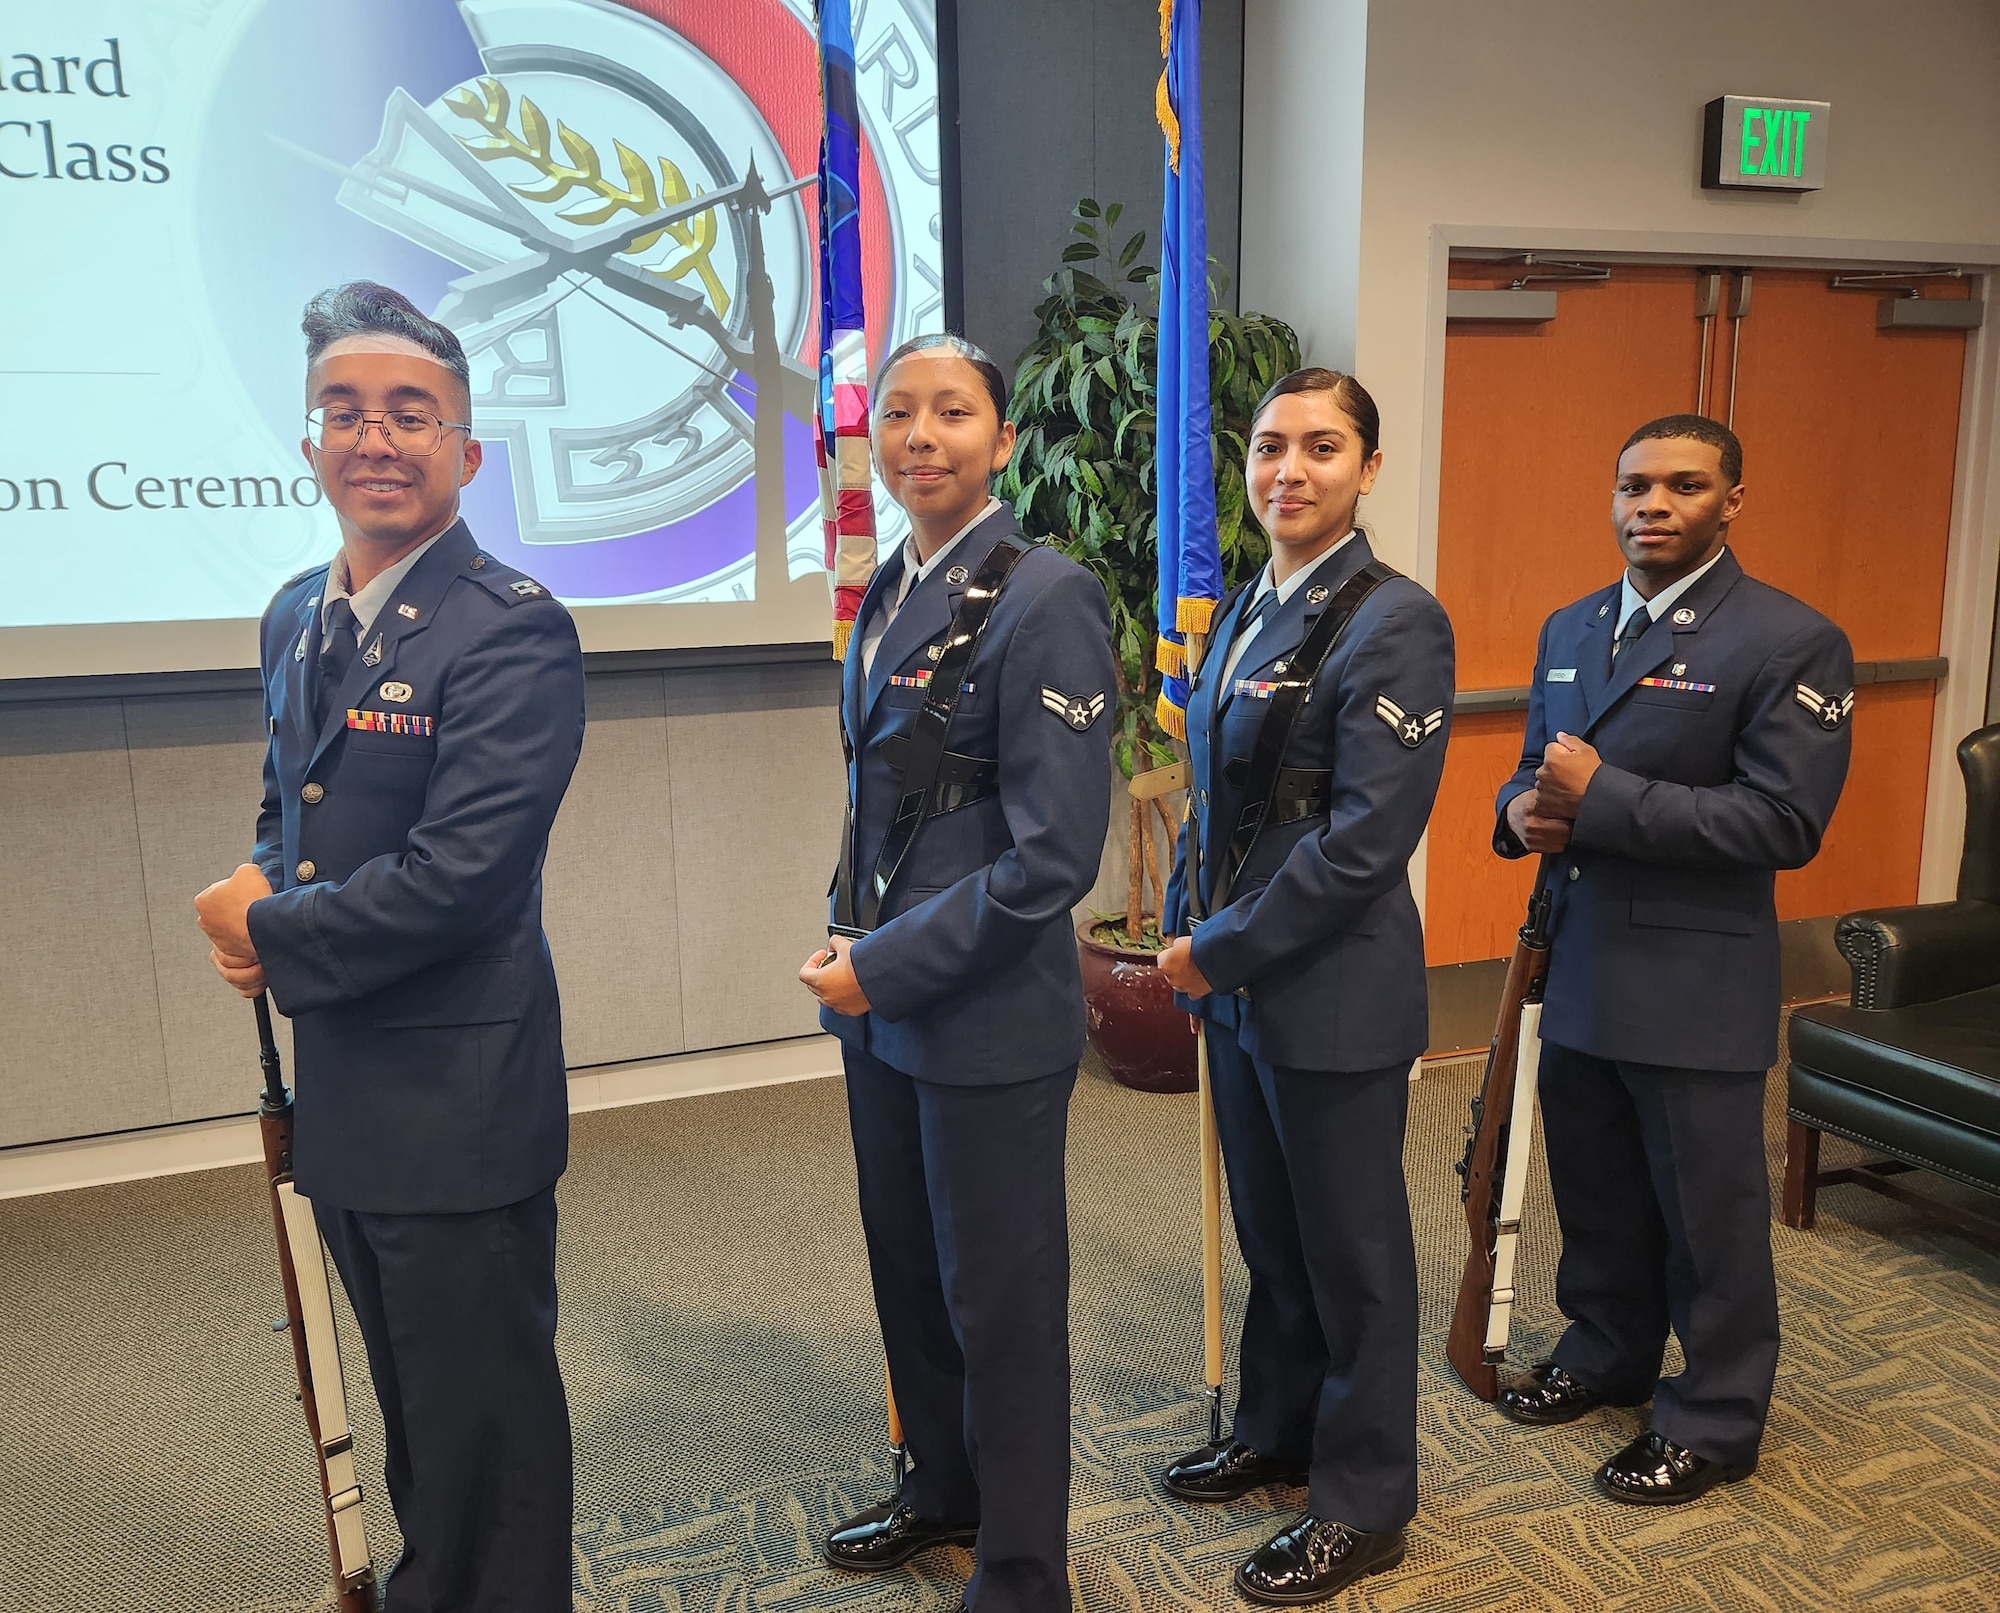 Capt. Roberto Amaya, Airman 1st Class Litzy Jaime, Airman 1st Class Alicia Ramirez, and Airman 1st Class Ethan French, new members of the Base Honor Guard stand ready to show their skills on graduation day at Los Angeles Air Force Base July 21 in El Segundo, Calif.